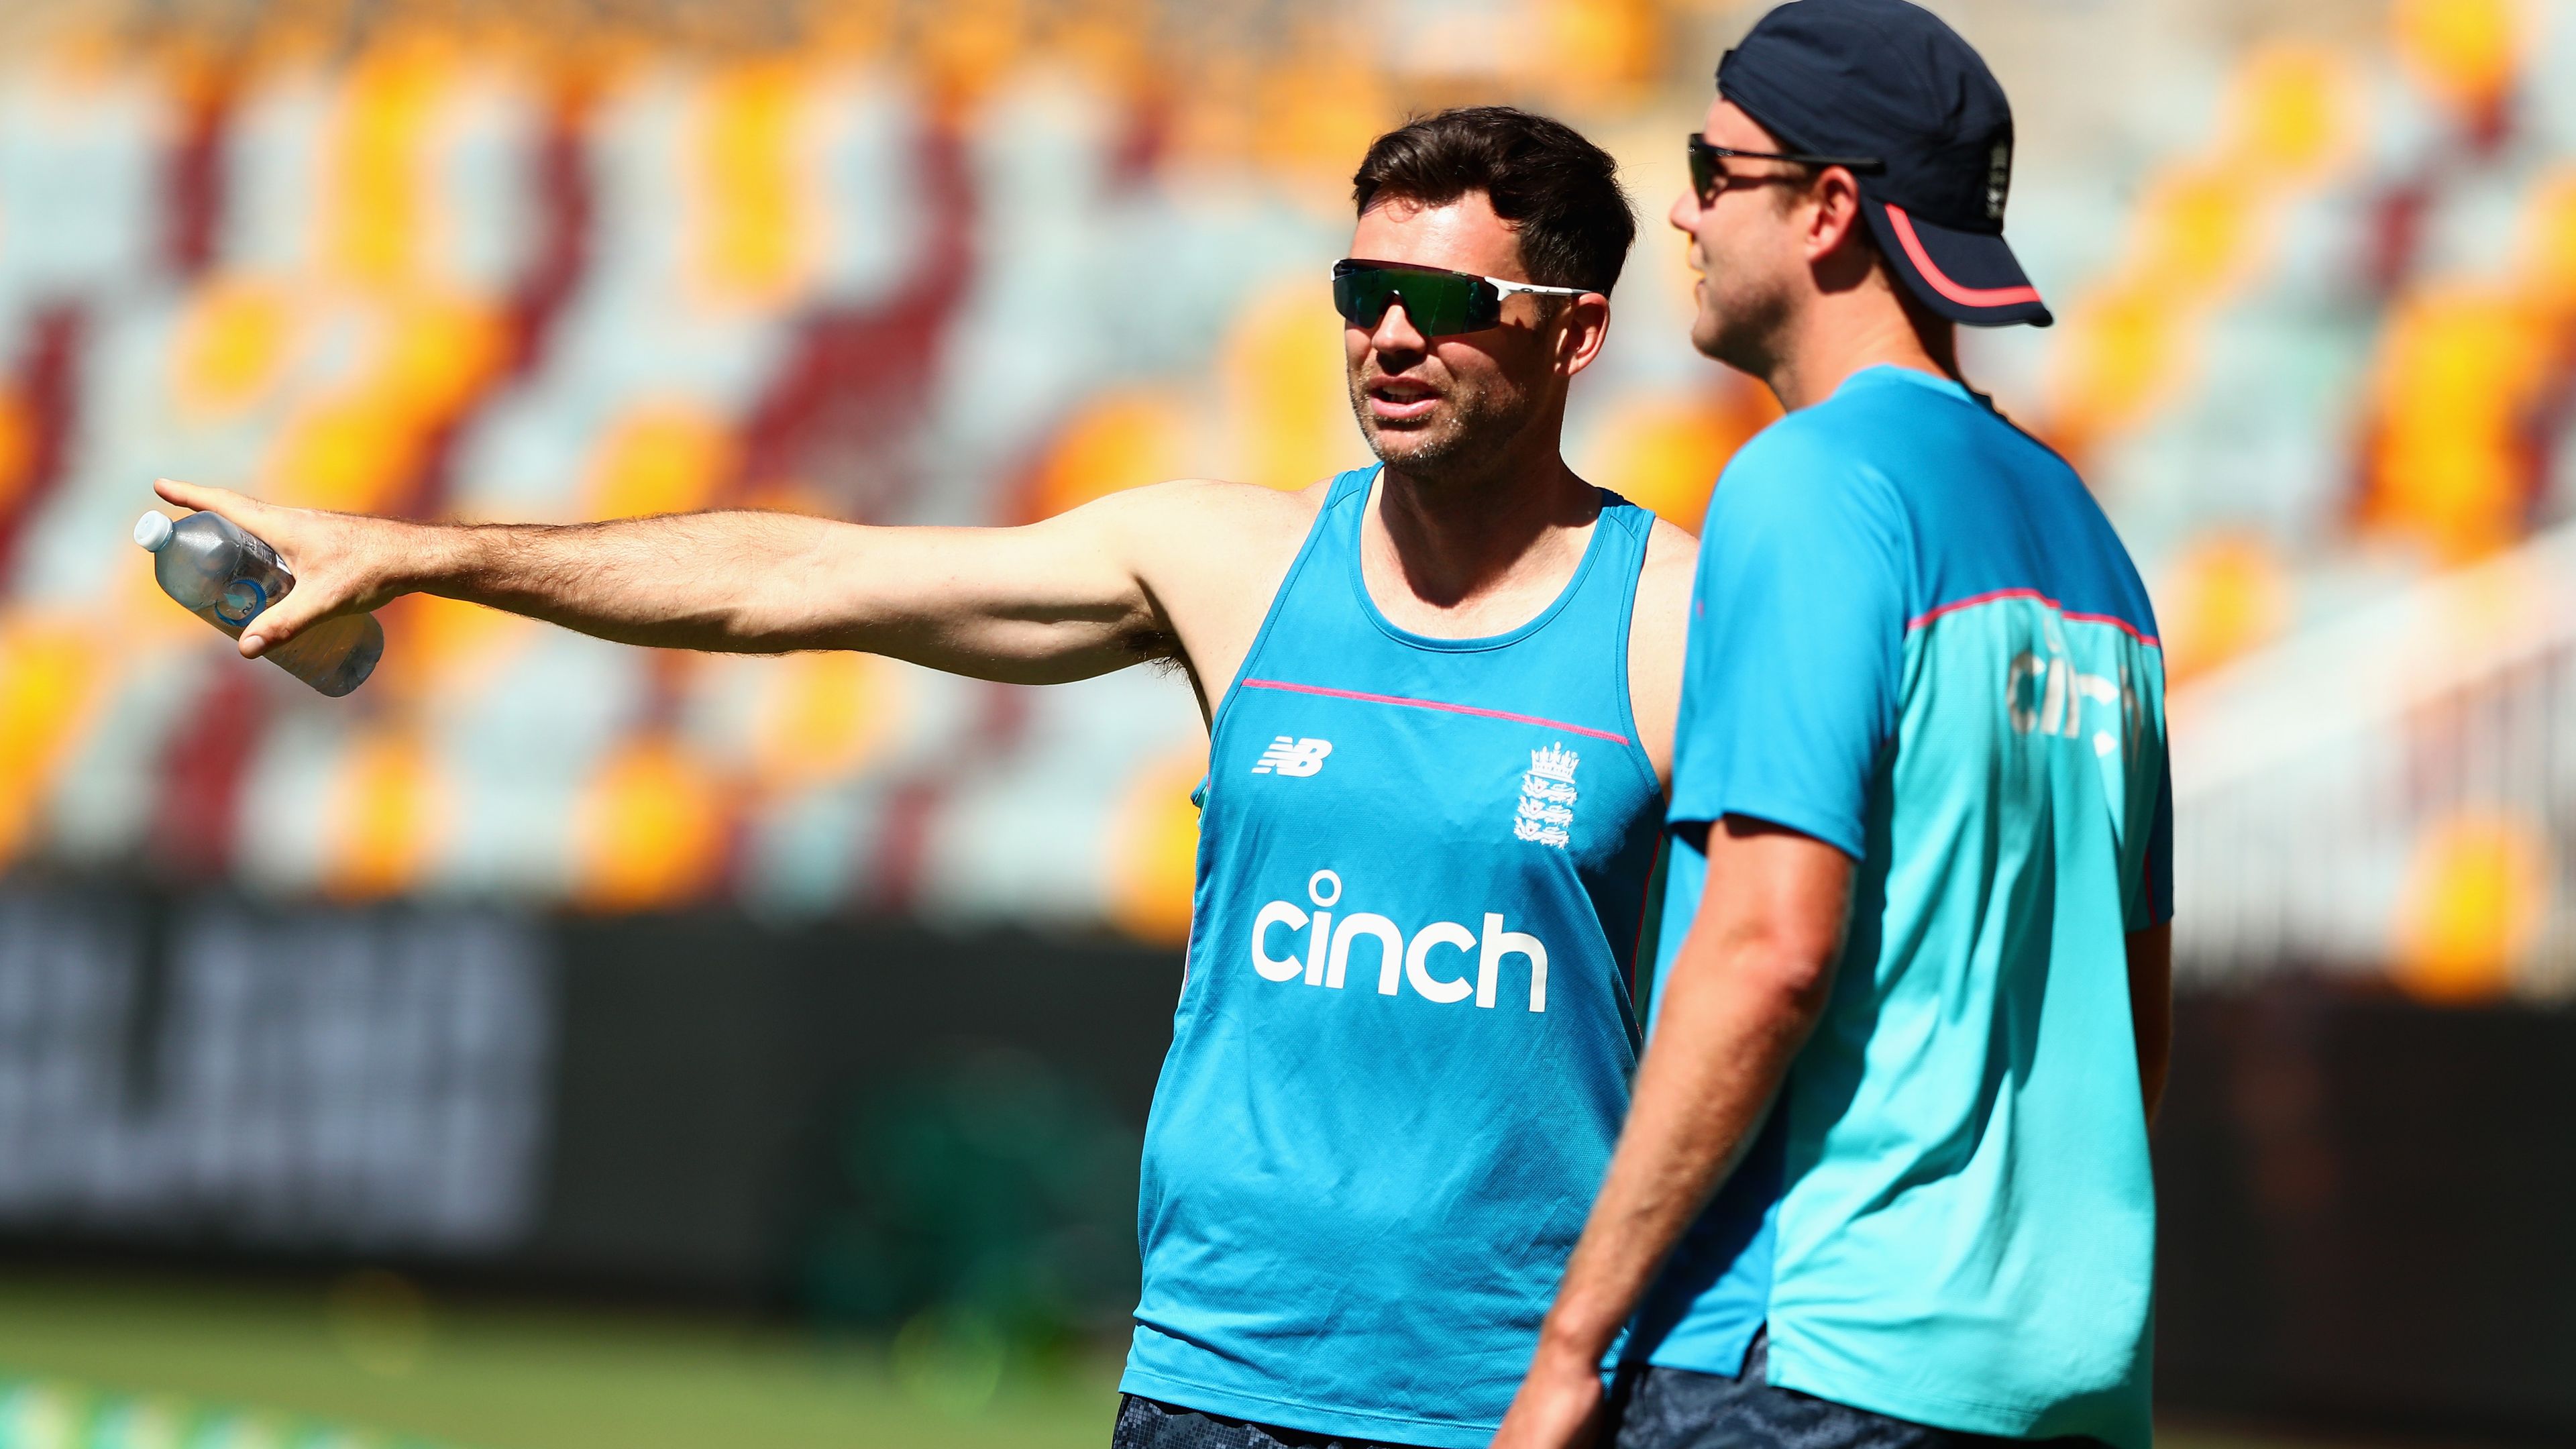 Sighting of James Anderson and Stuart Broad made England omissions even more puzzling